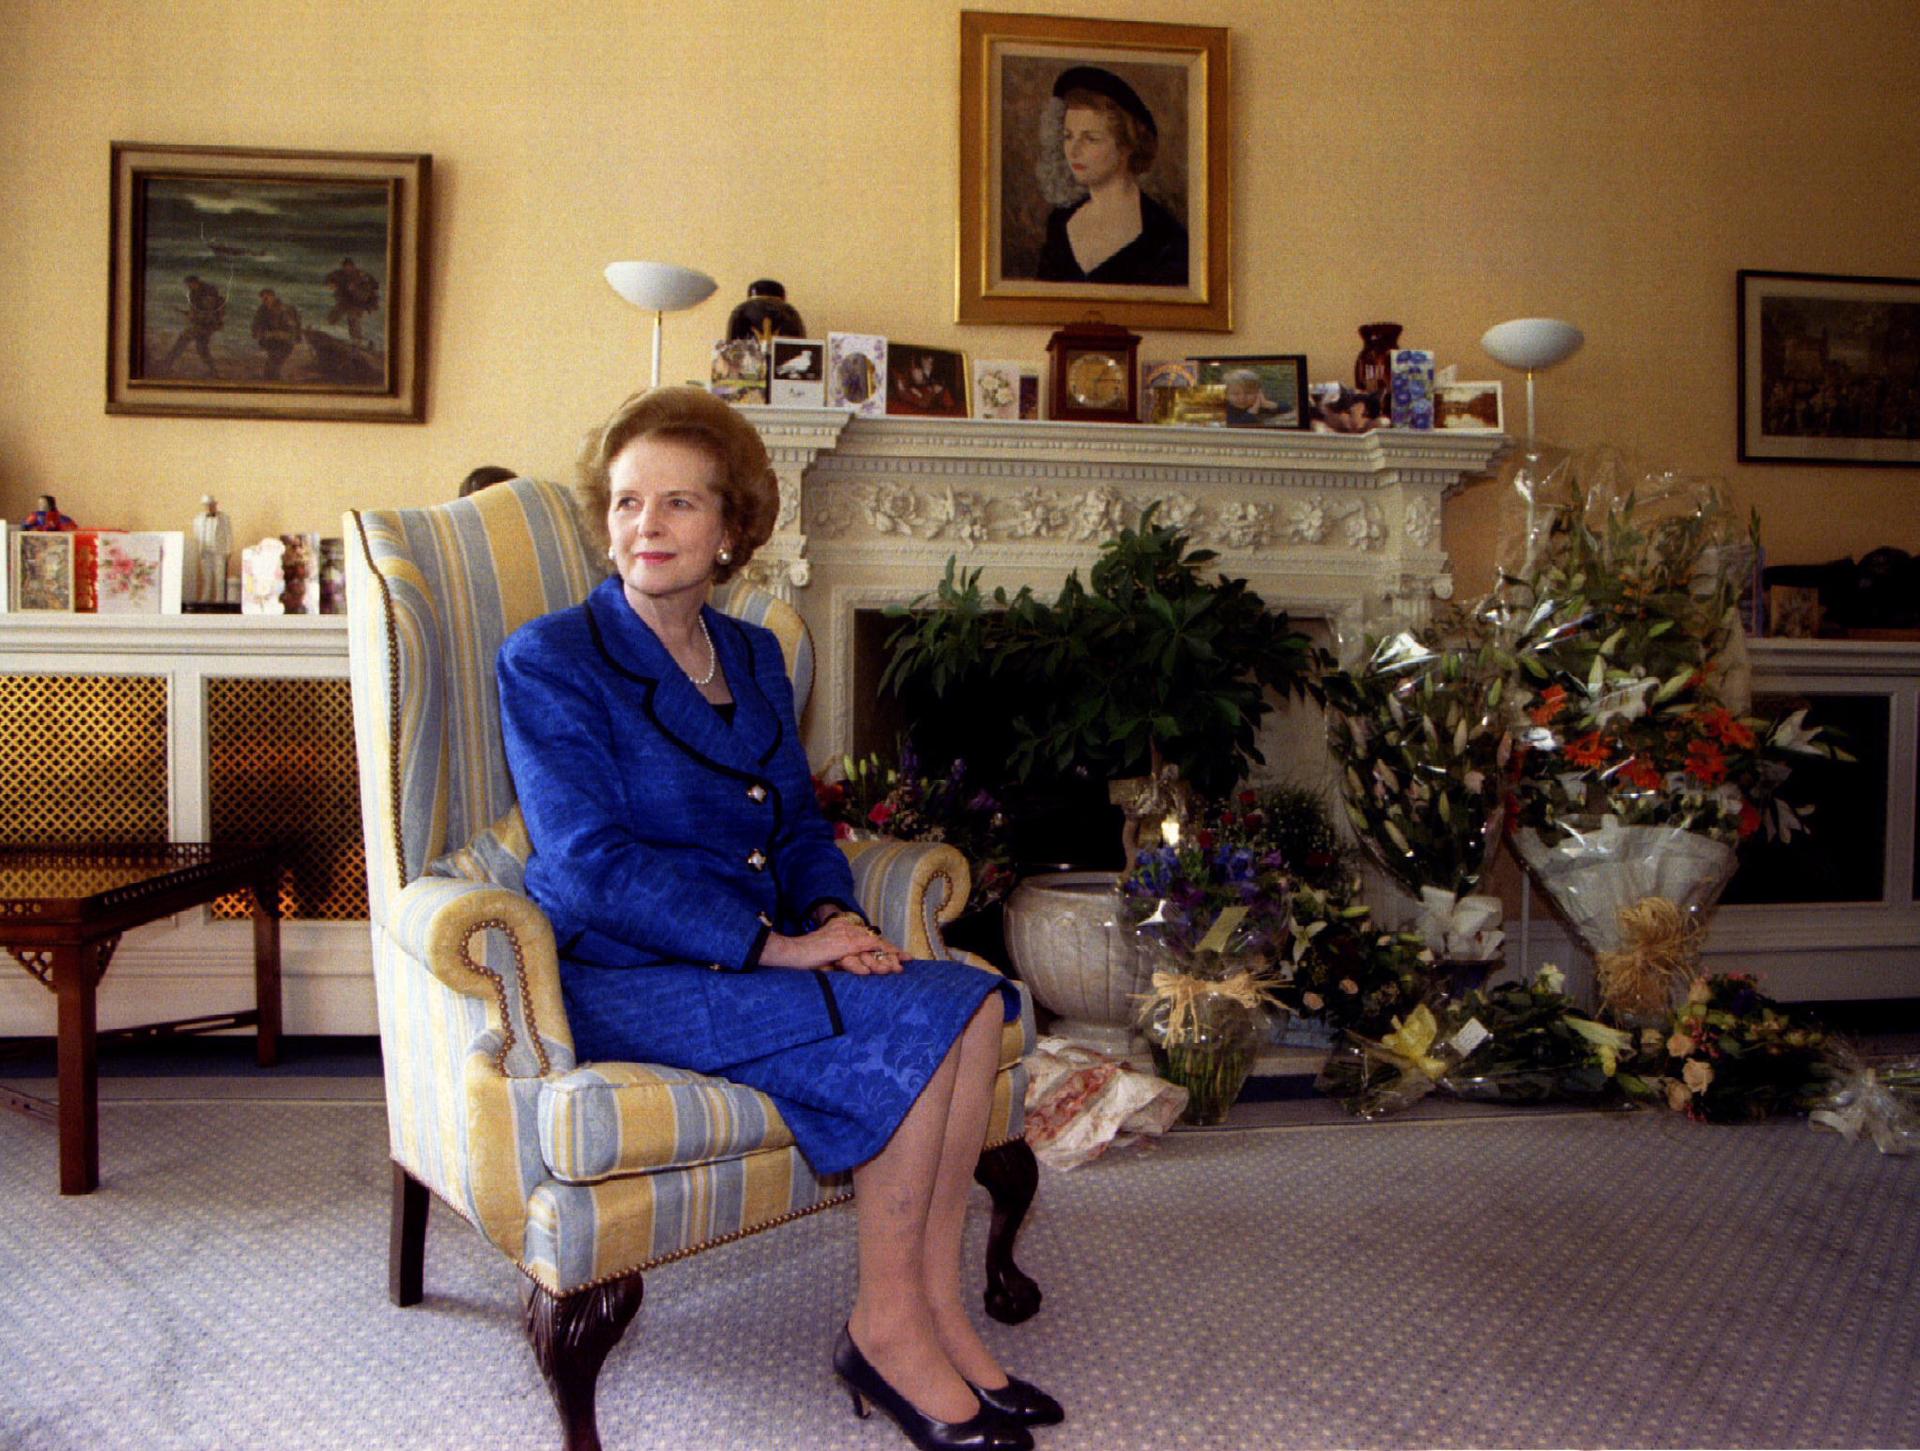 Former Prime Minister Margaret Thatcher sits at home for a 70th birthday photograph amidst floral greetings October 13, 1995.